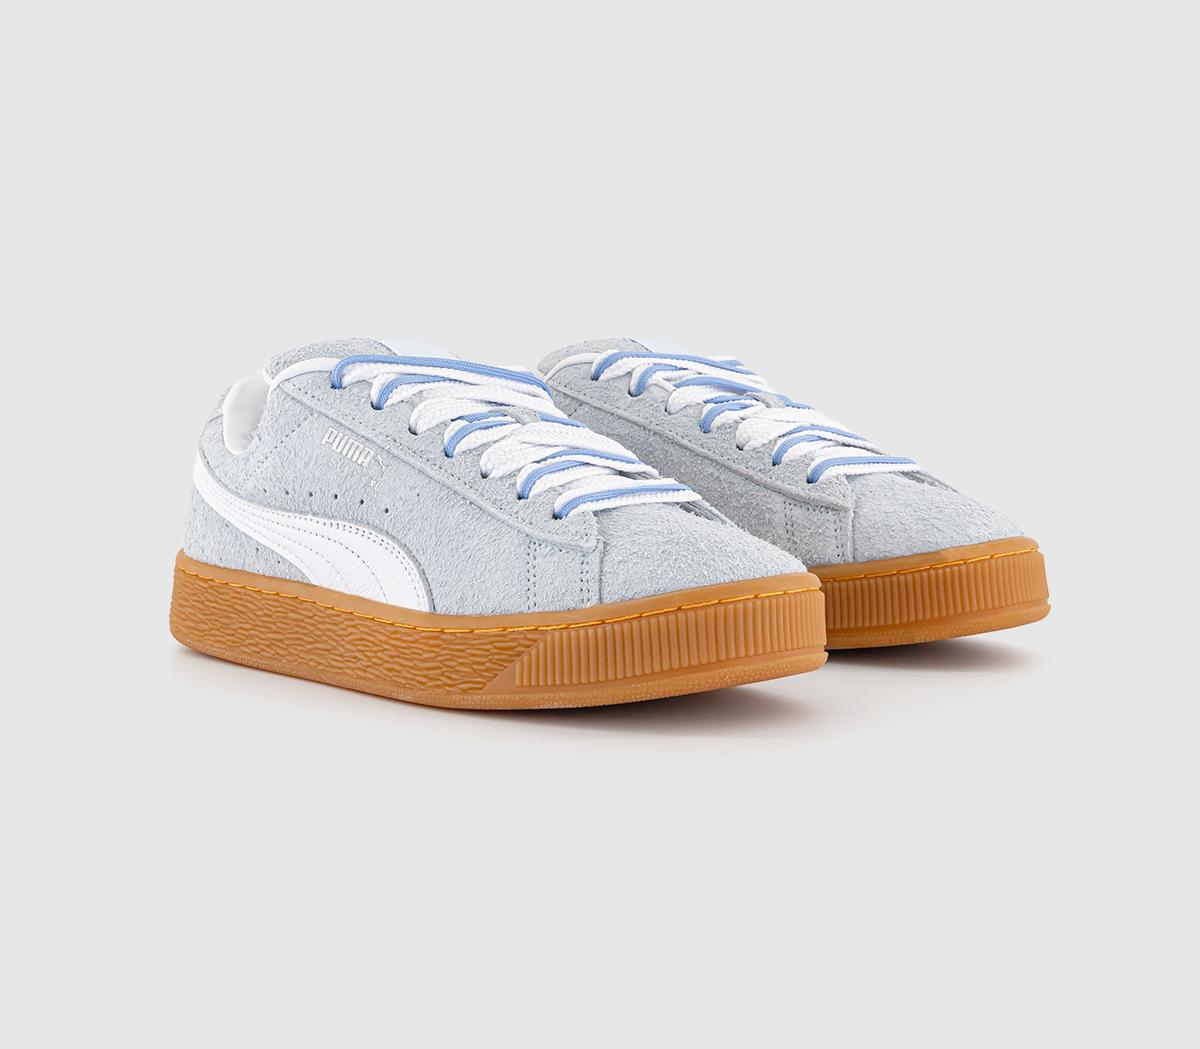 Puma Womens Suede Xl Trainers Icy Blue White Silver, 7.5